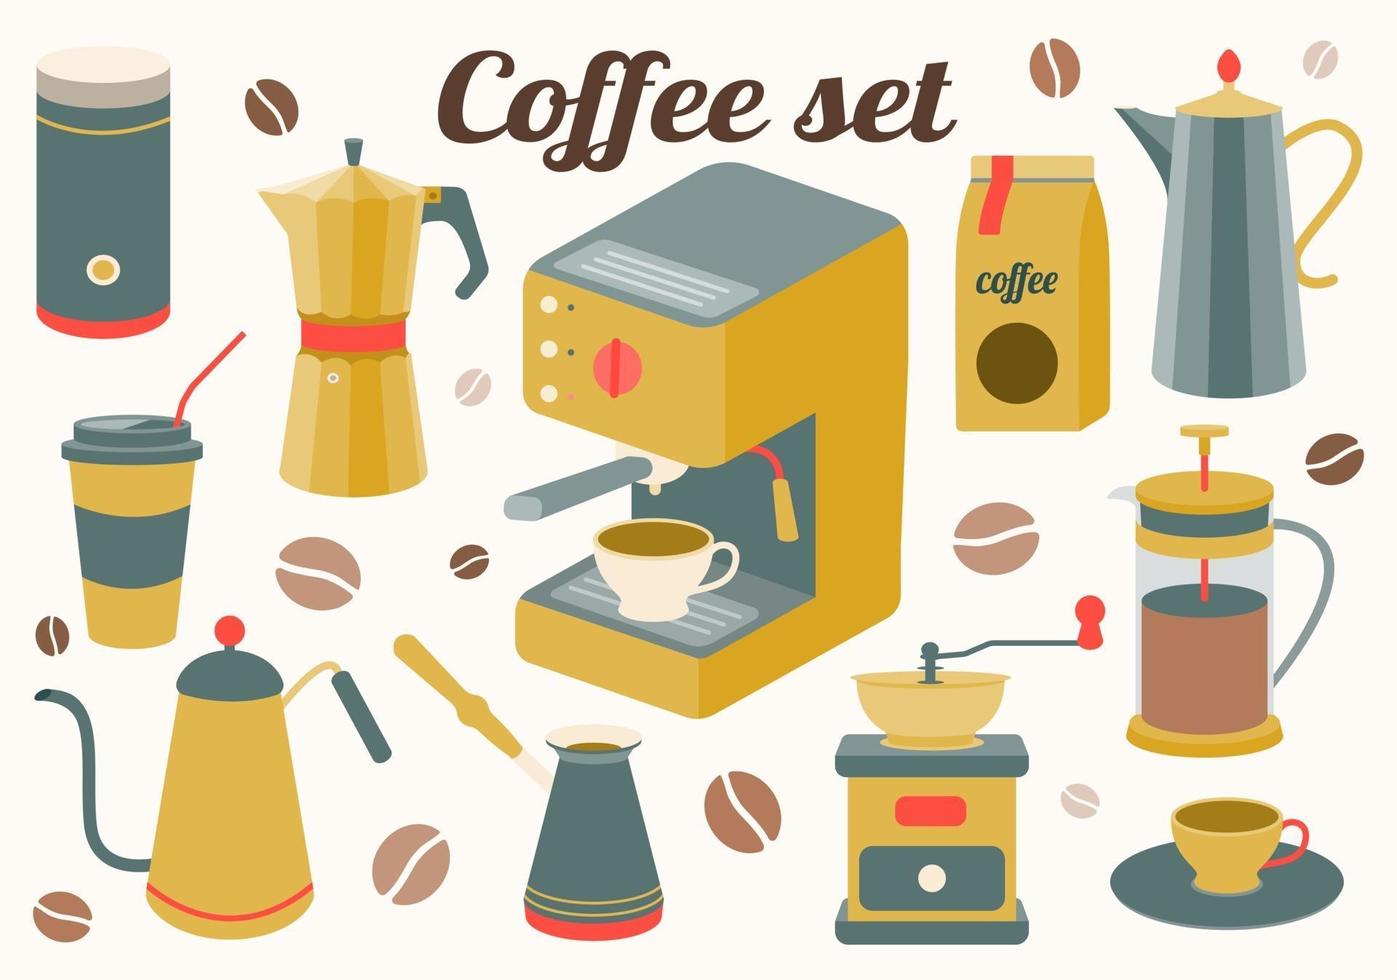 Coffee set of kitchen accessories for making a drink. Maker, French press, pot, coffee machine, grinder, grains. Vector illustration